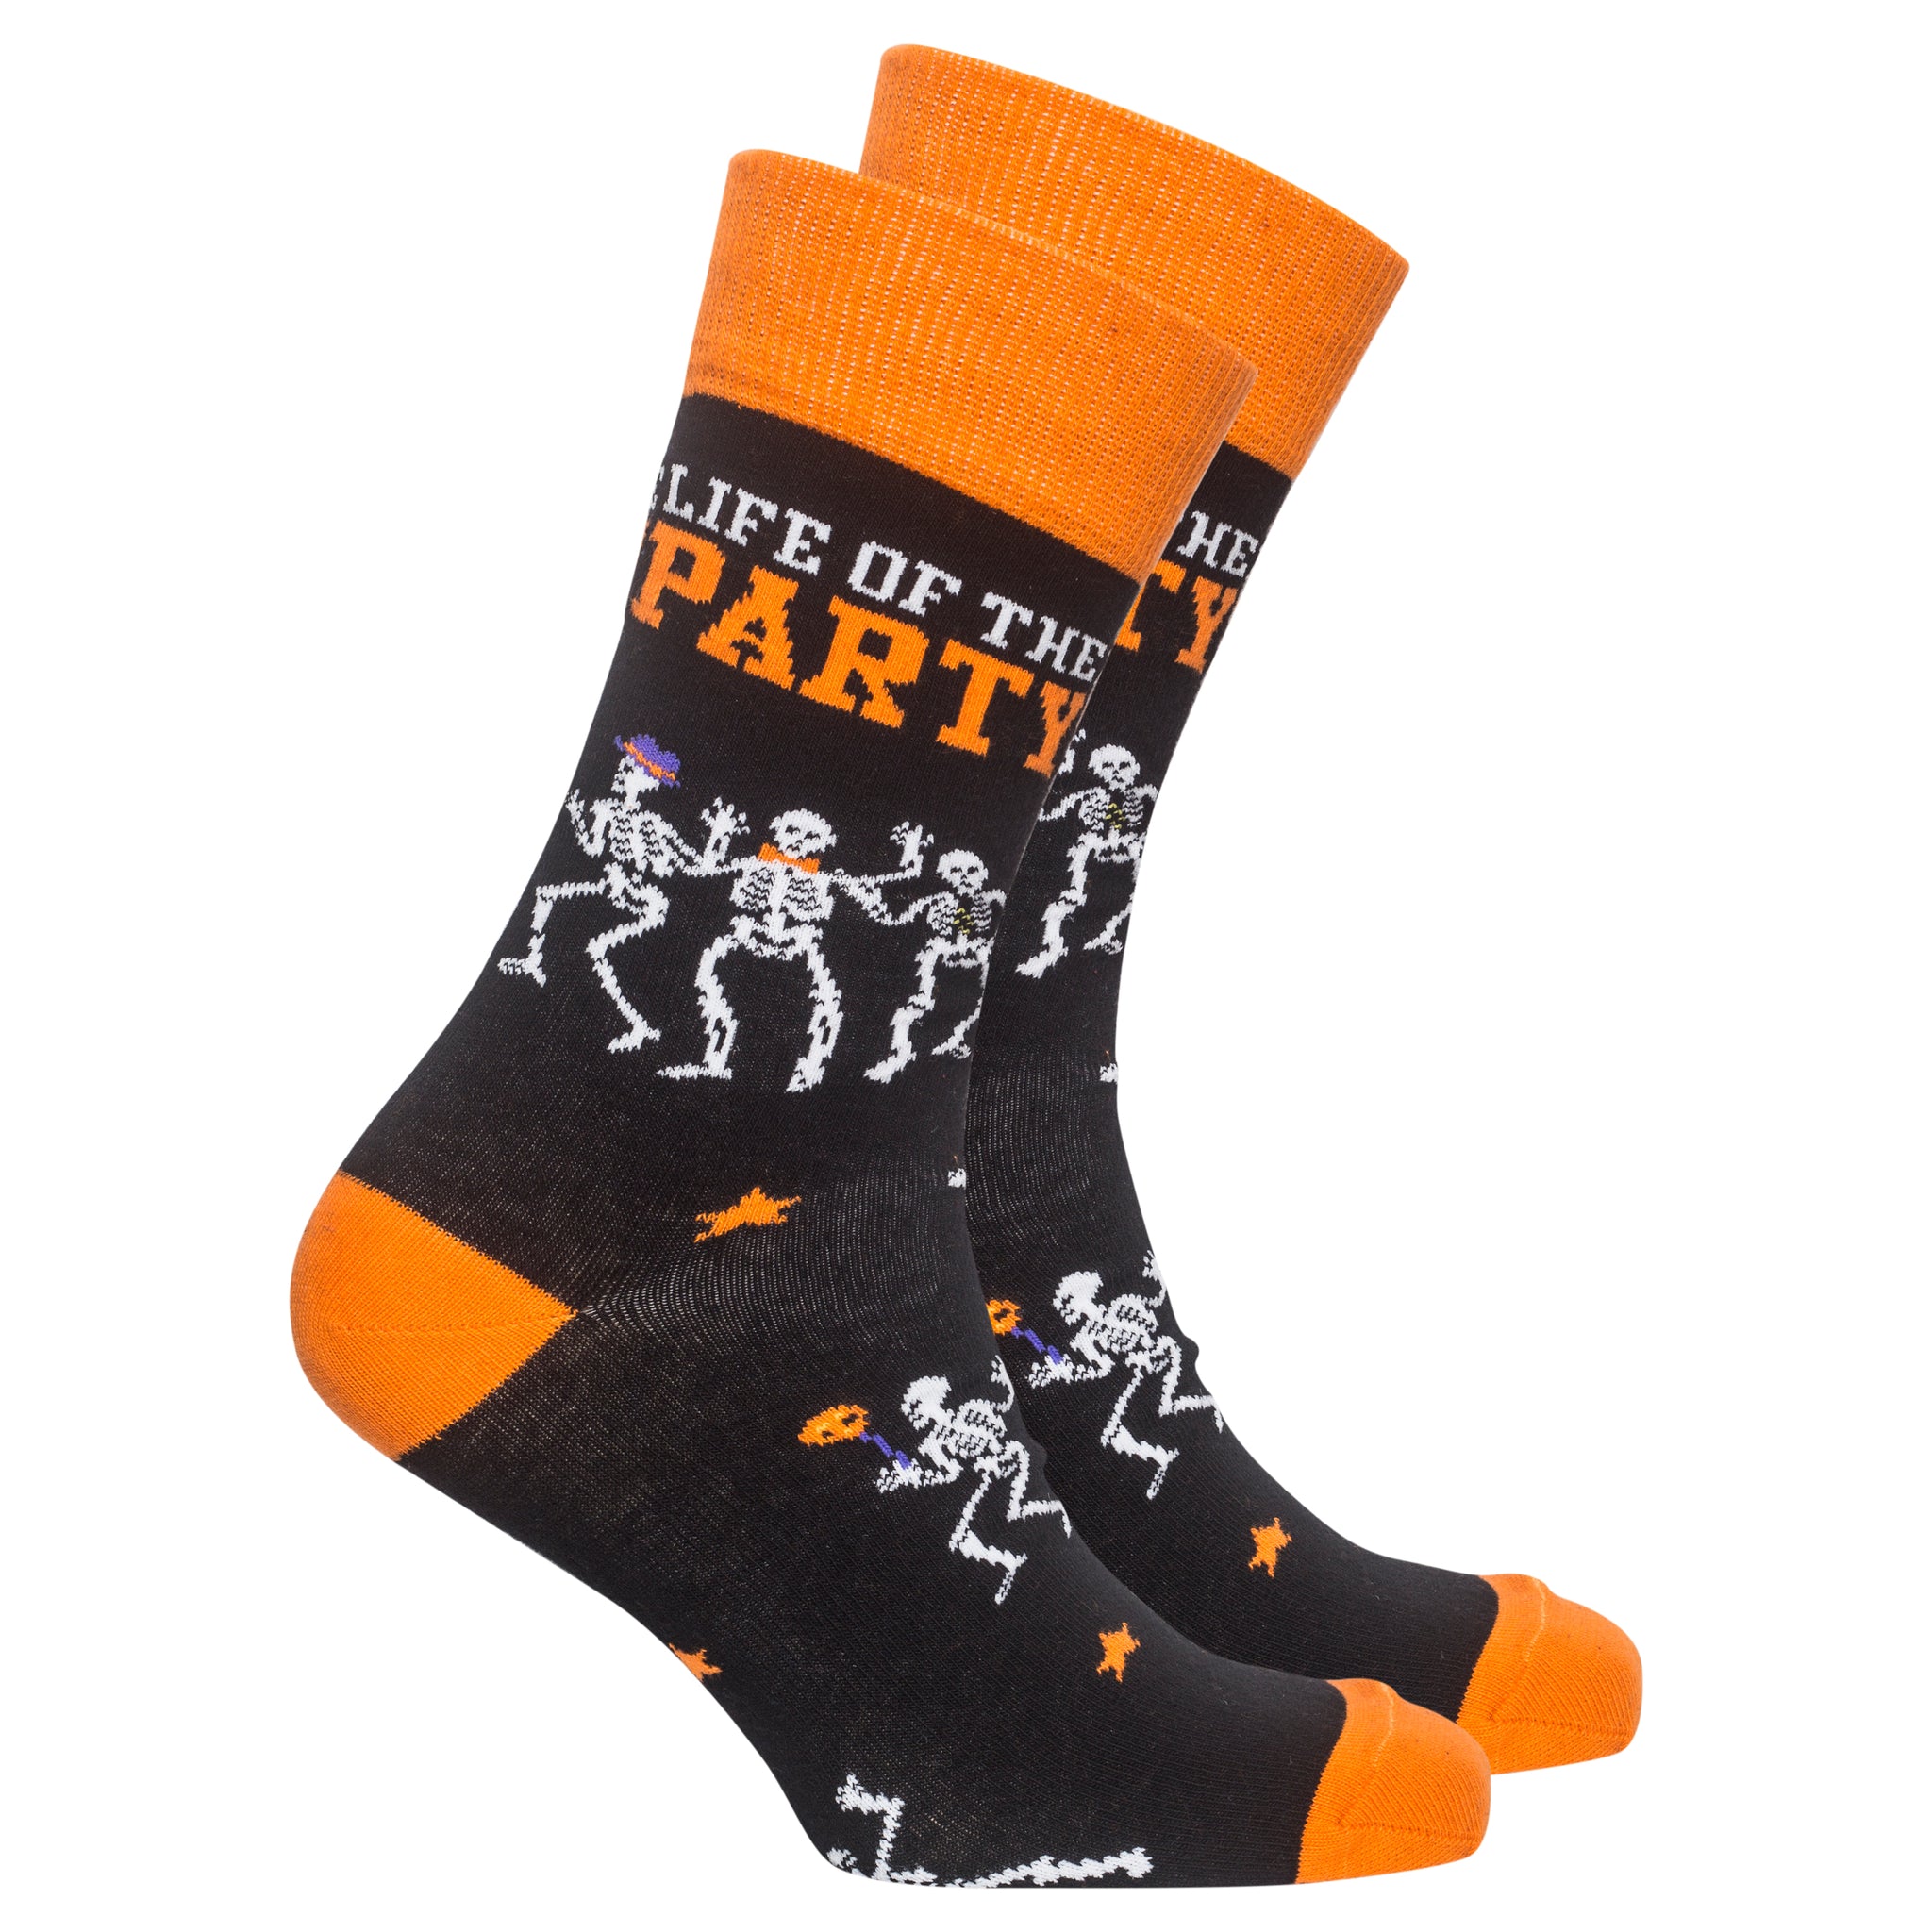 Men's Life Of The Party Socks